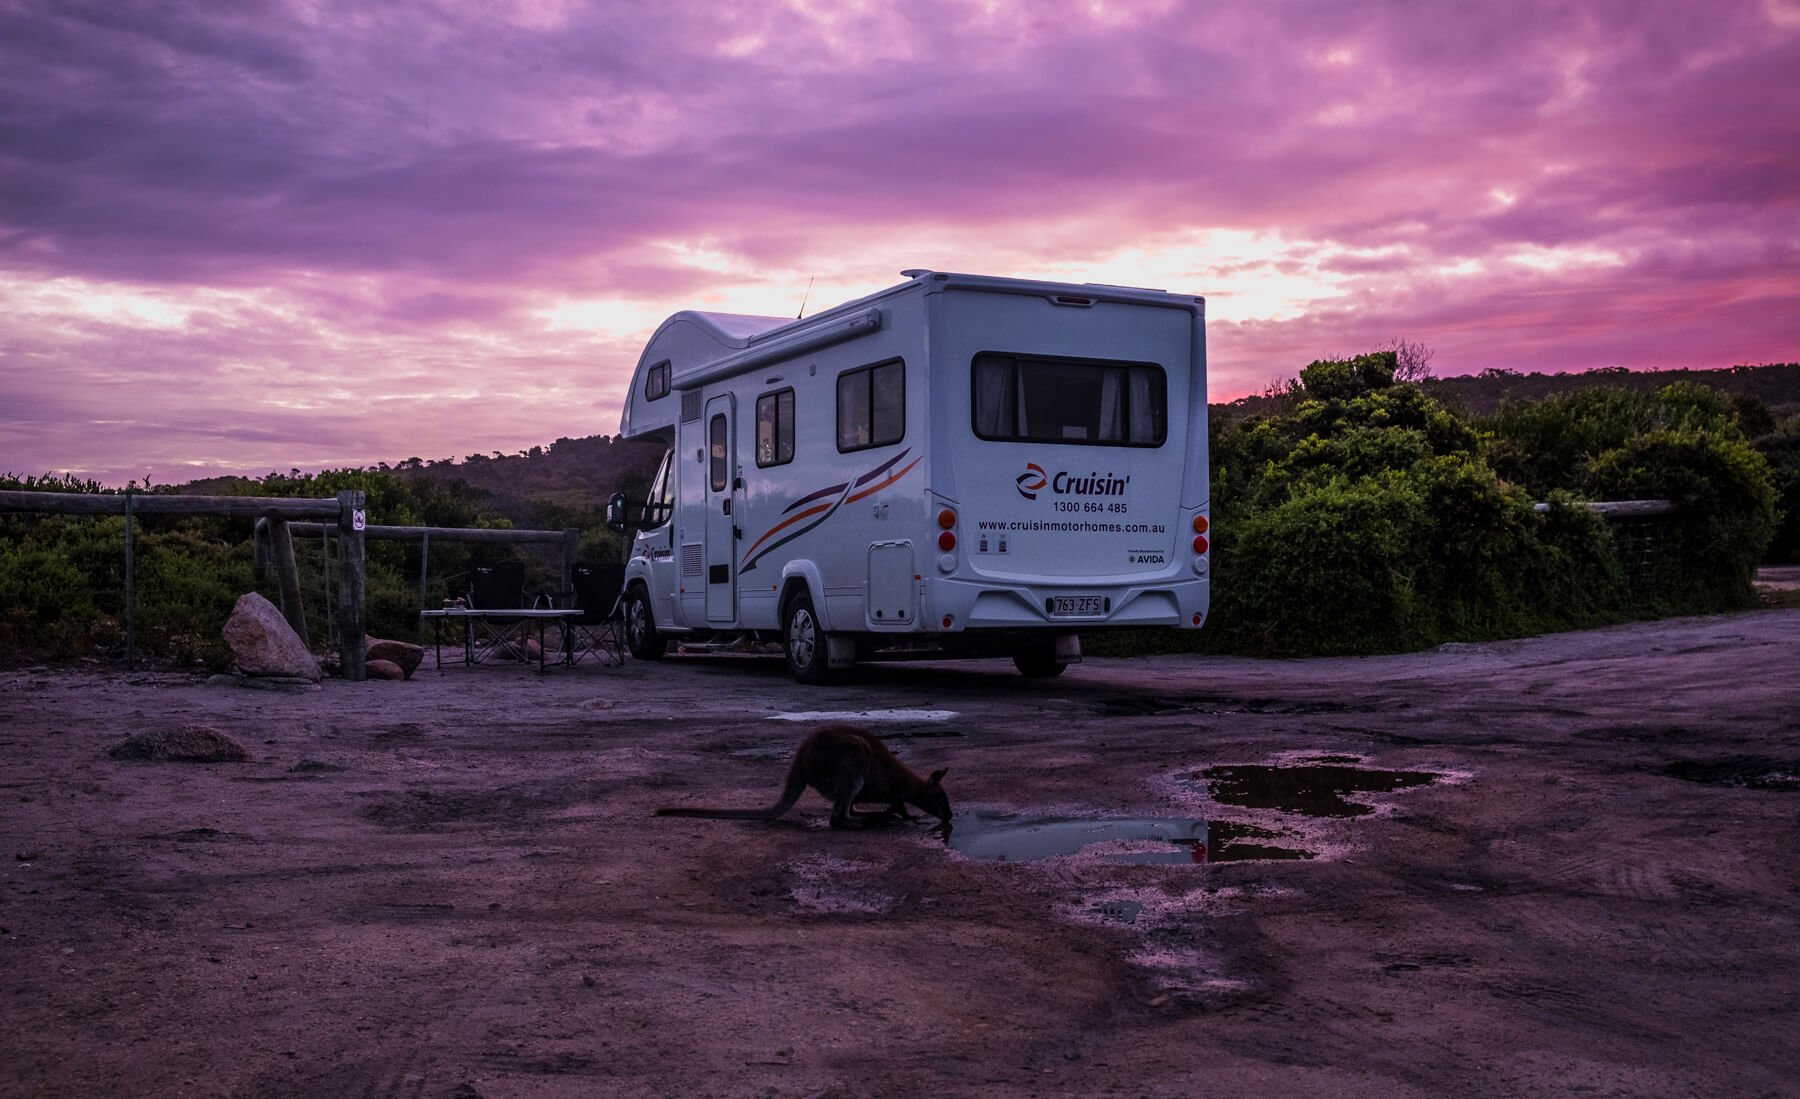 A vibrant sunset over an RV motorhome parked by a popular beach in Tasmania